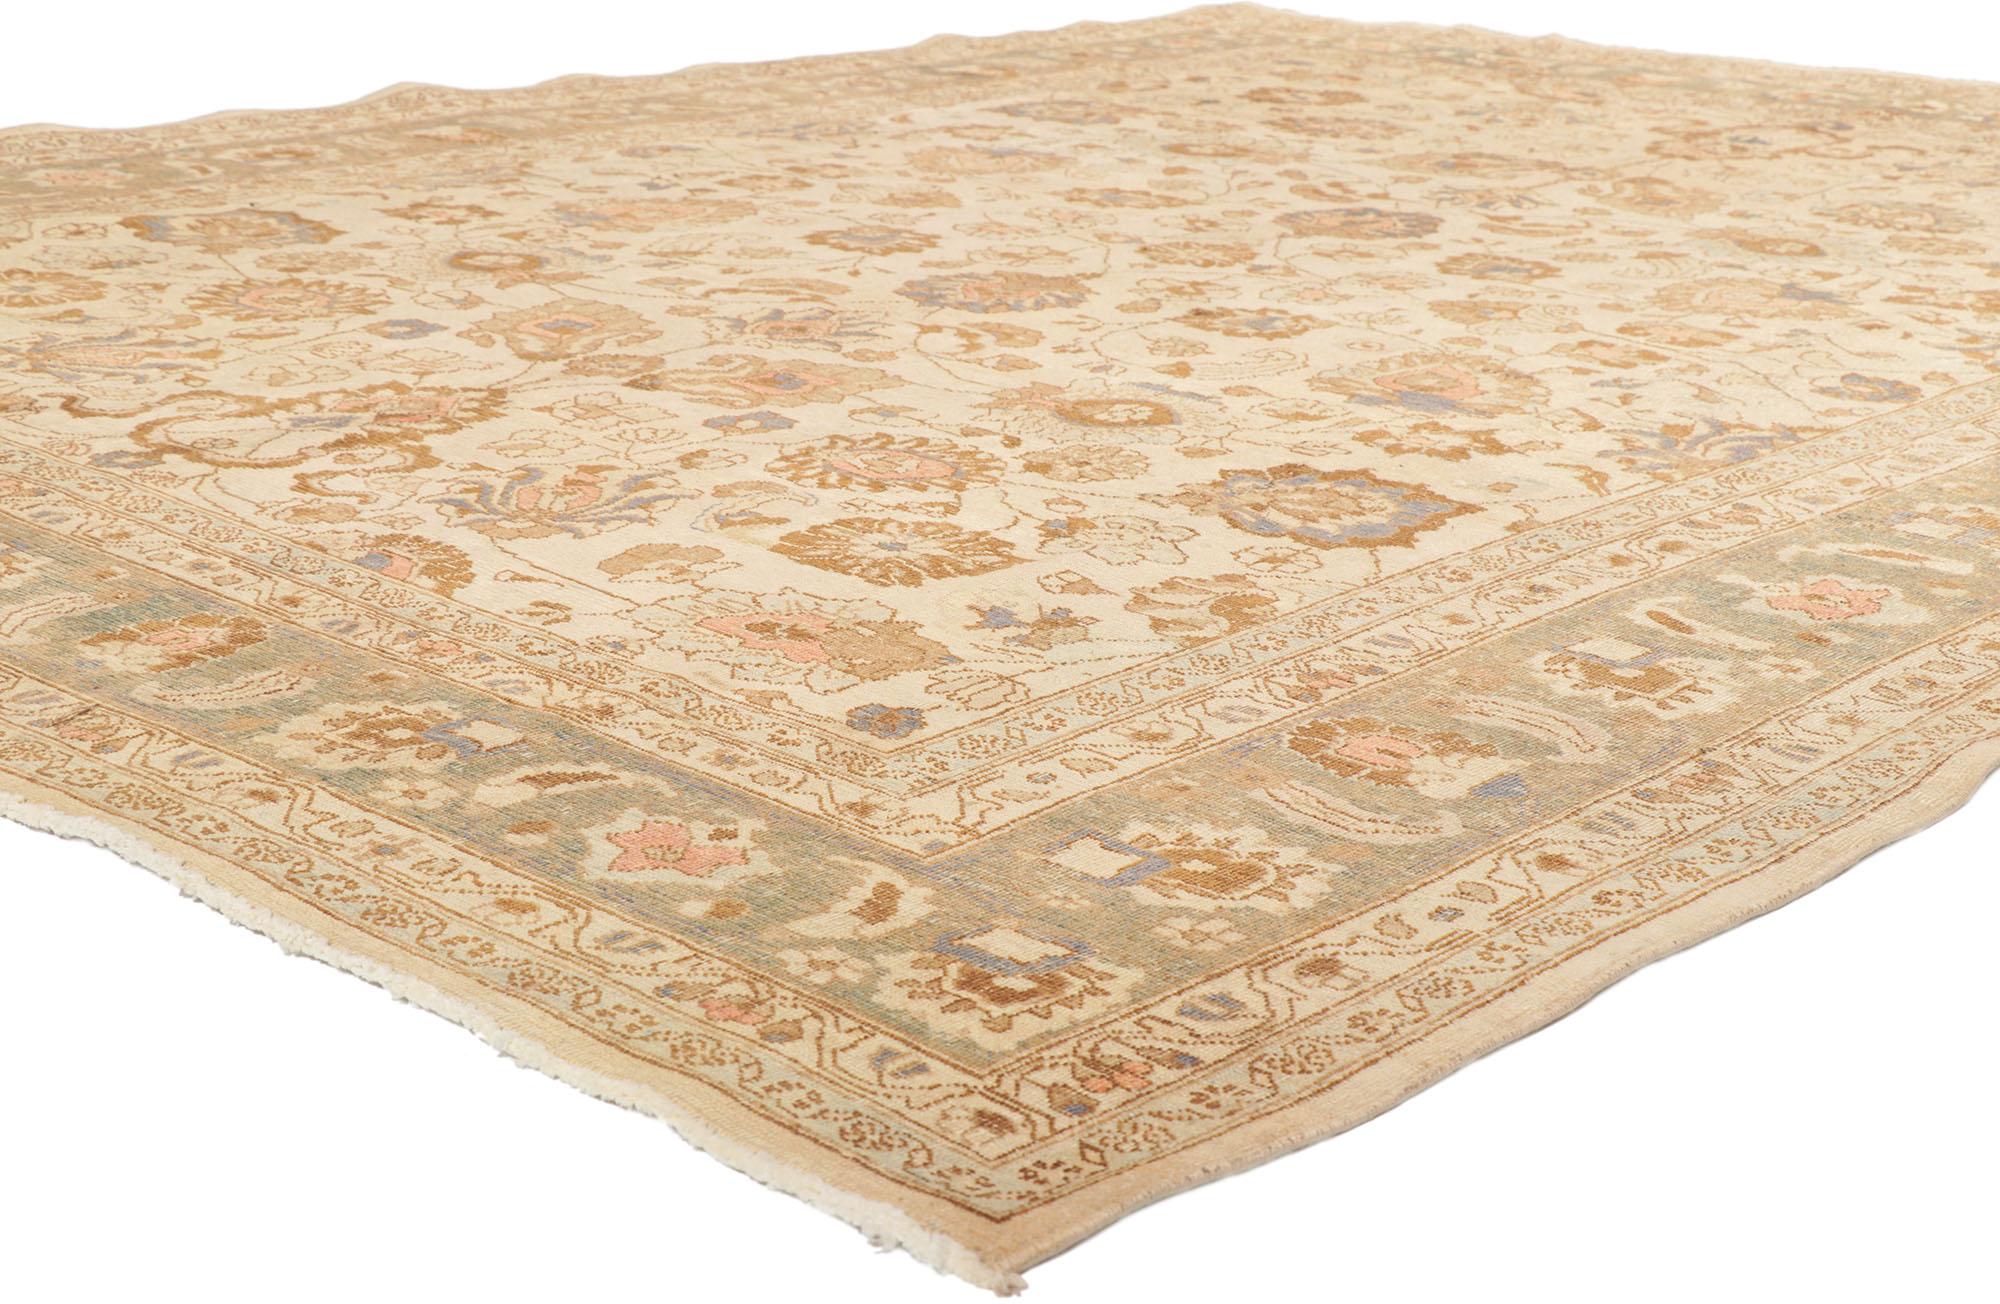 53773 Antique Persian Khorassan rug with Grandmillennial Style 08'02 x 11'03. Take a timeless, tailored design, mix in a dash of romantic connotations and soft colors to get this fresh look that’s as comfortable as it is chic. Soft, bespoke vibes